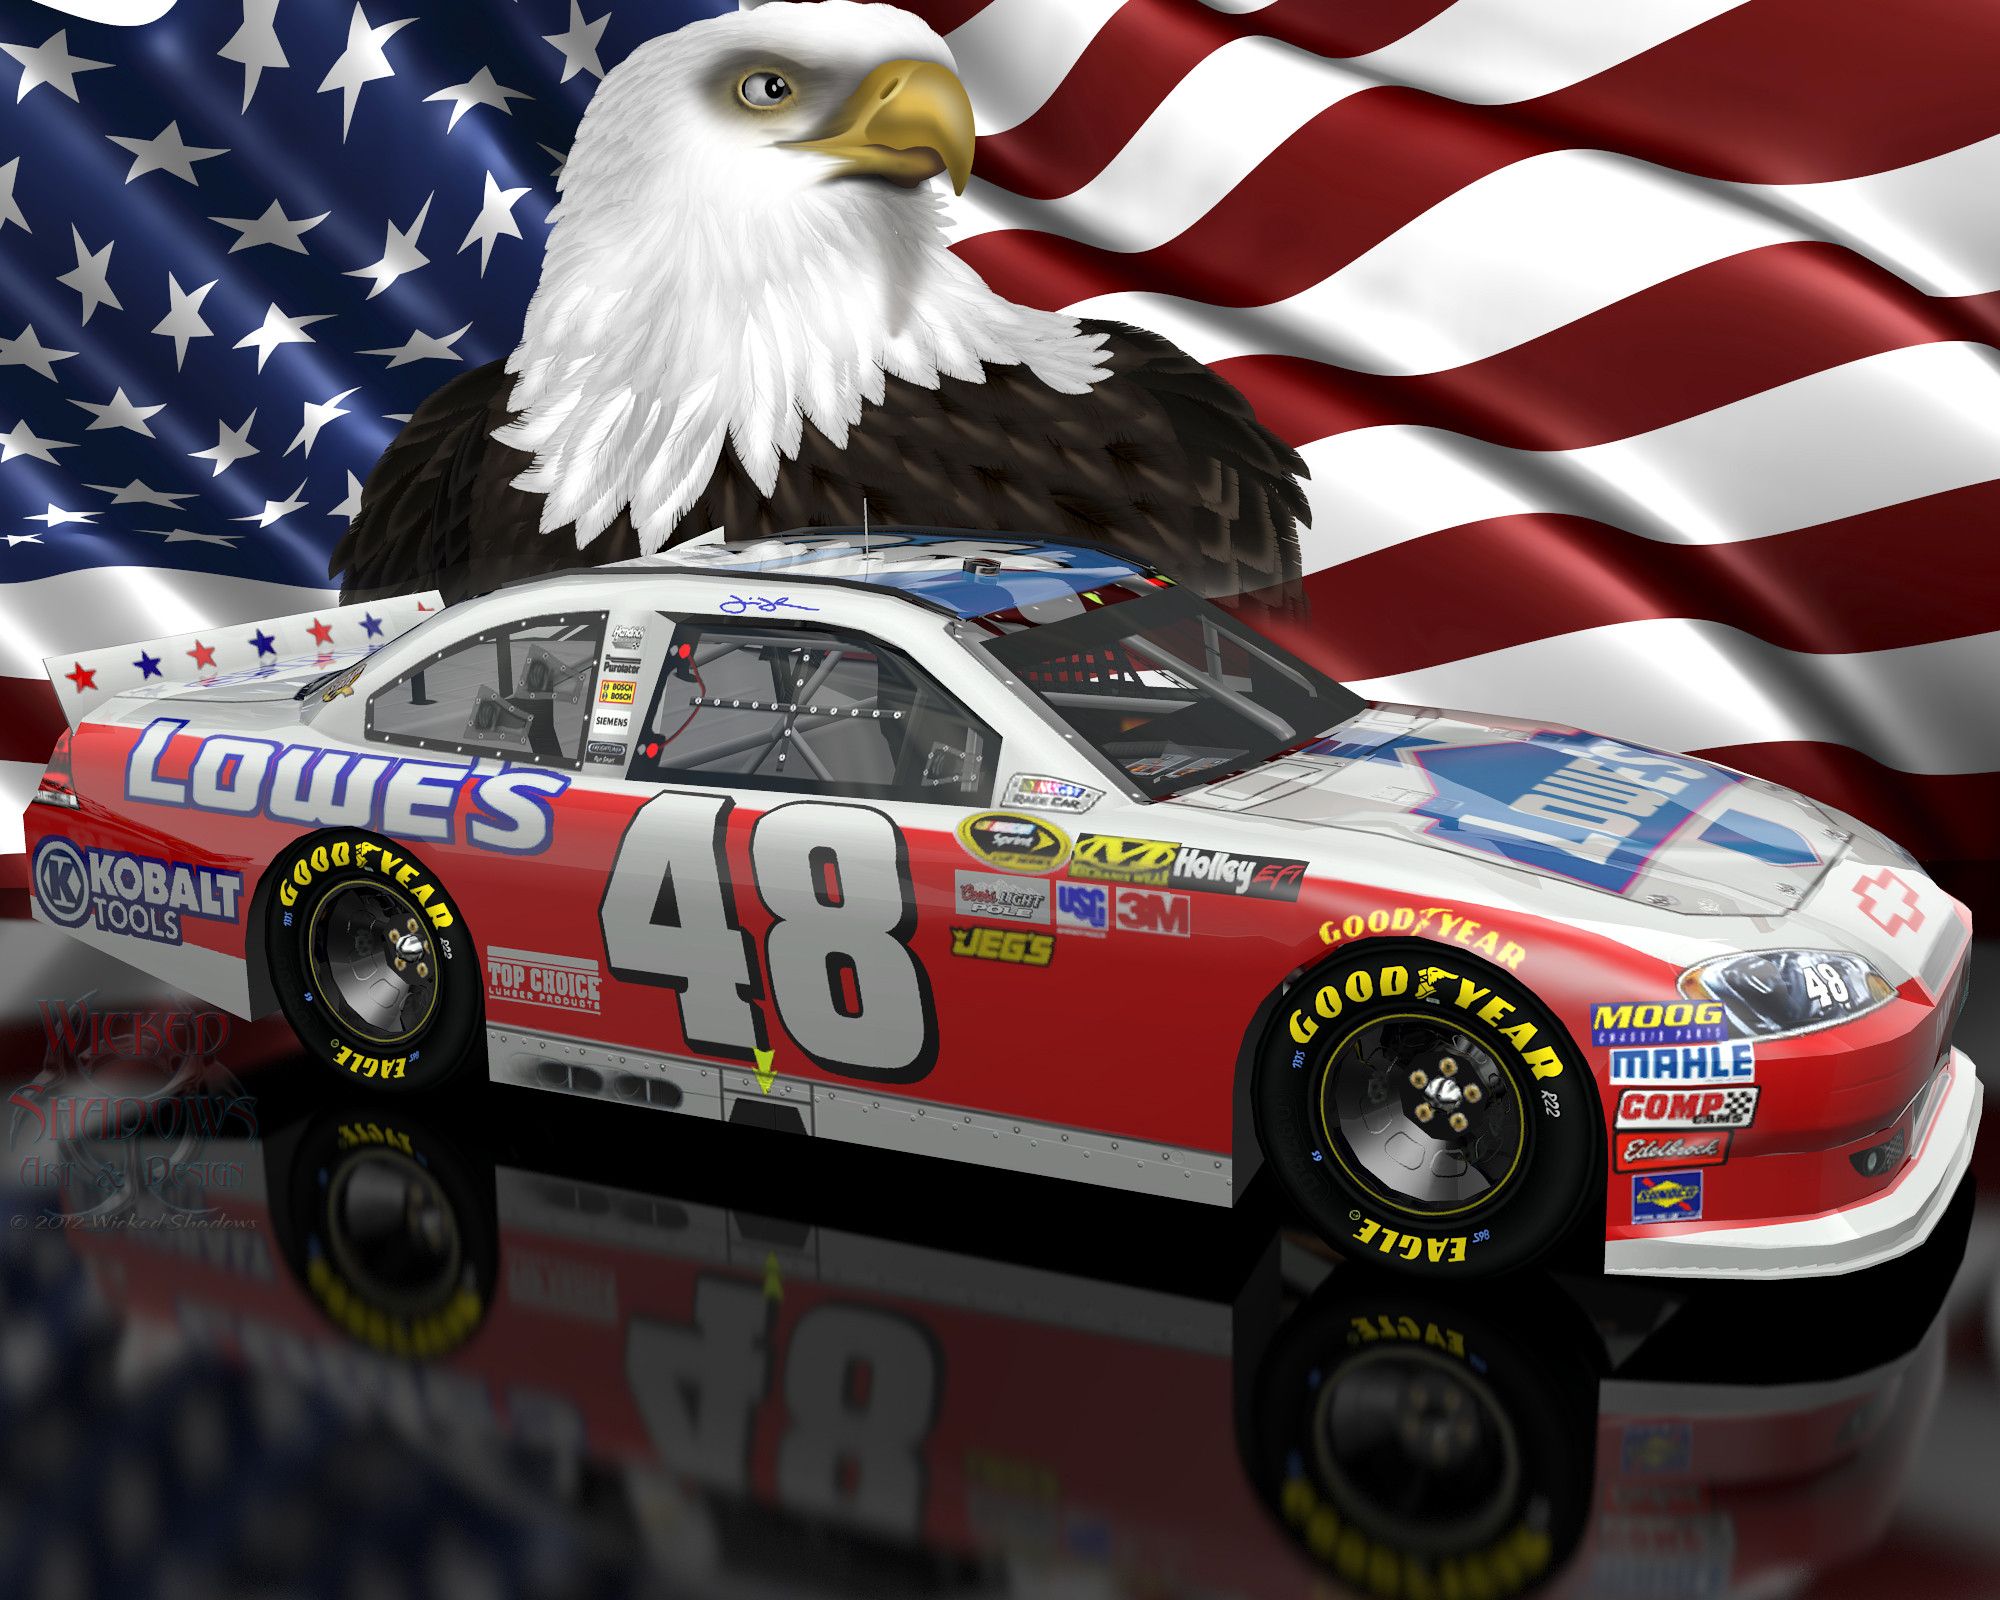 Image Nascar Wallpaper Jimmie Johnson Pc Android